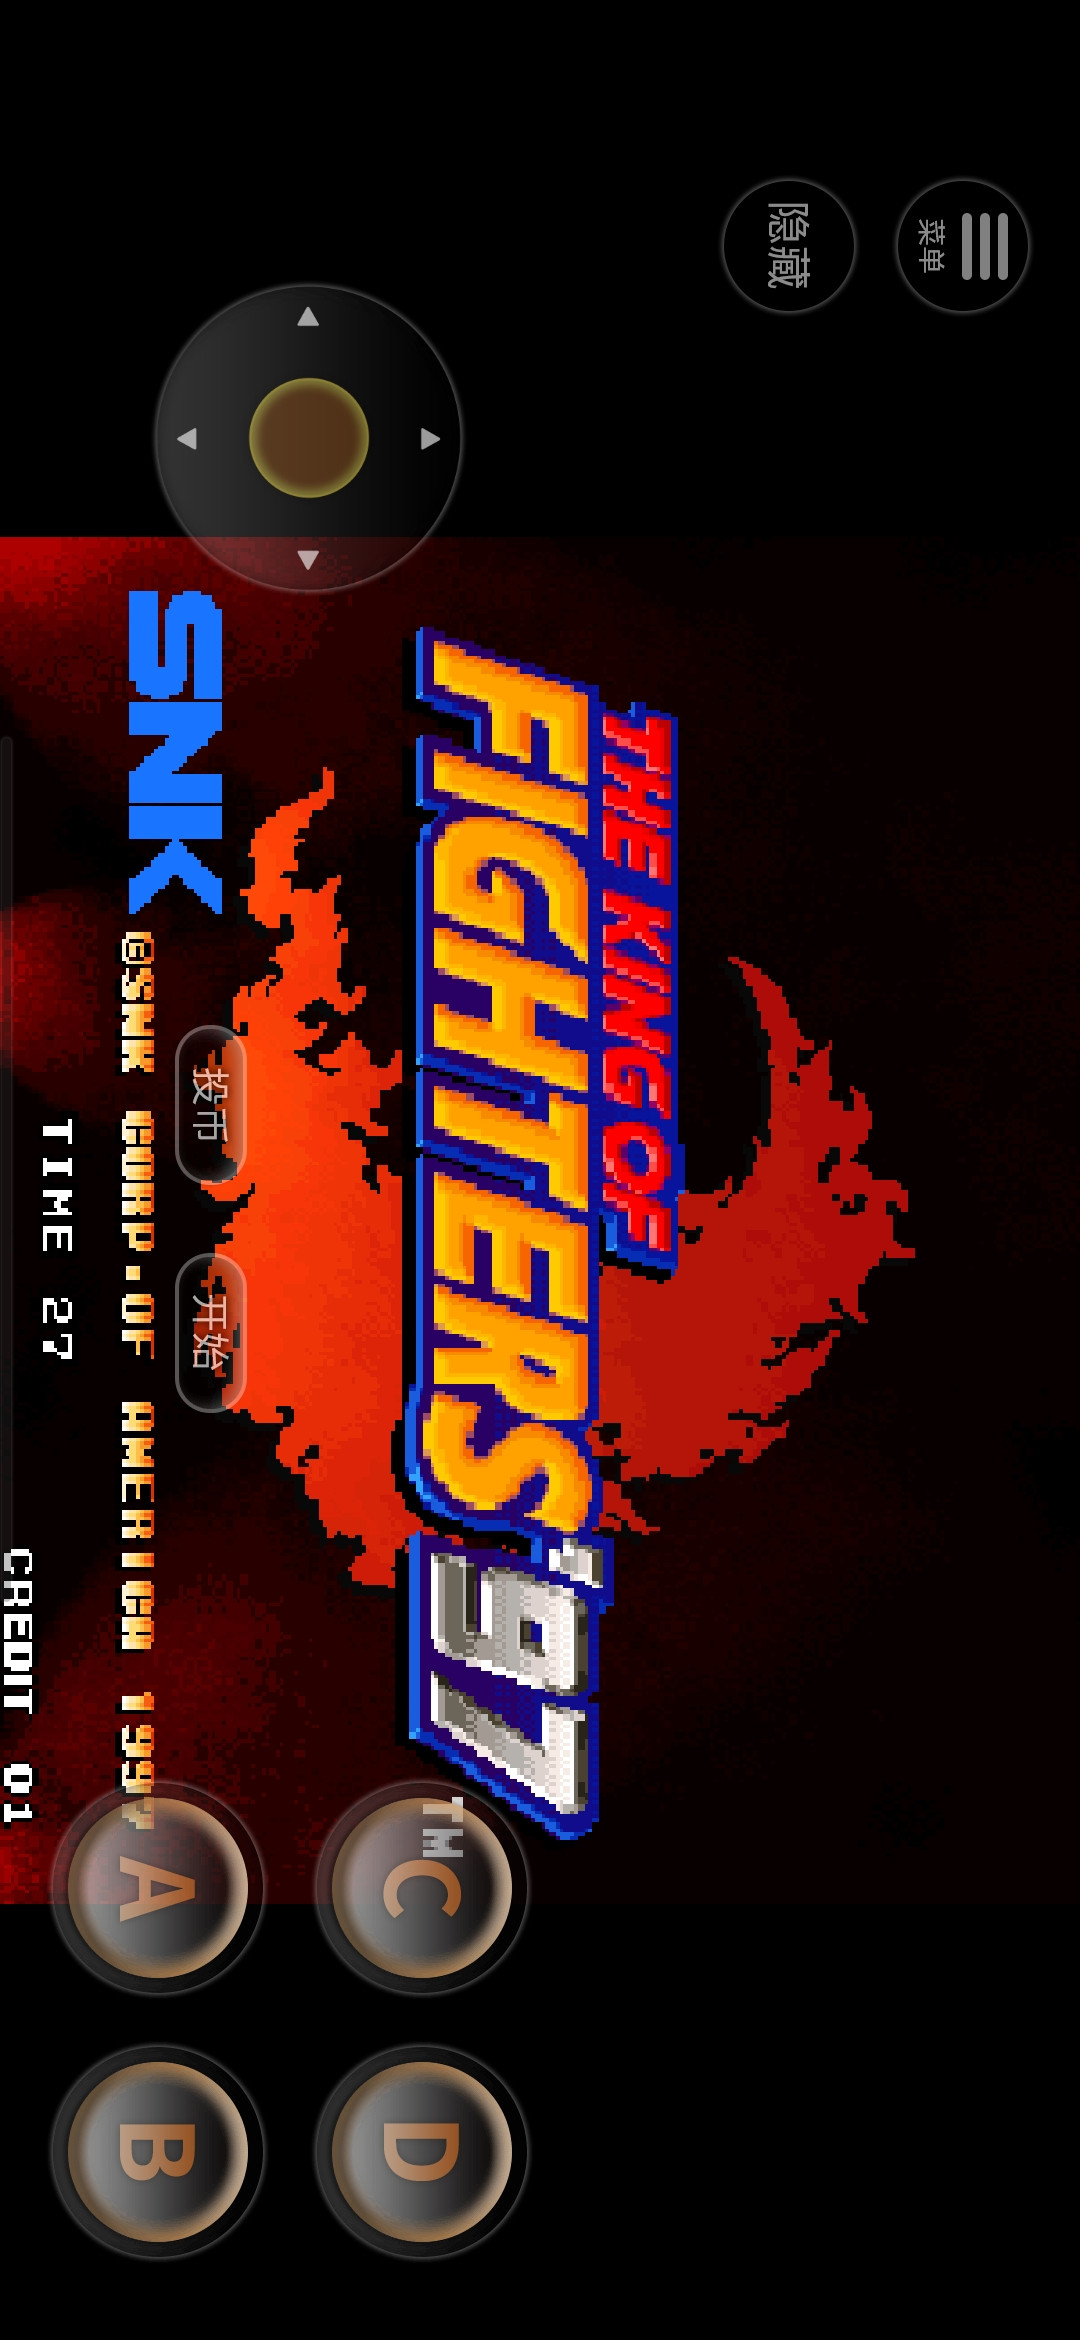 The king of fightrs 97(Arcade port)